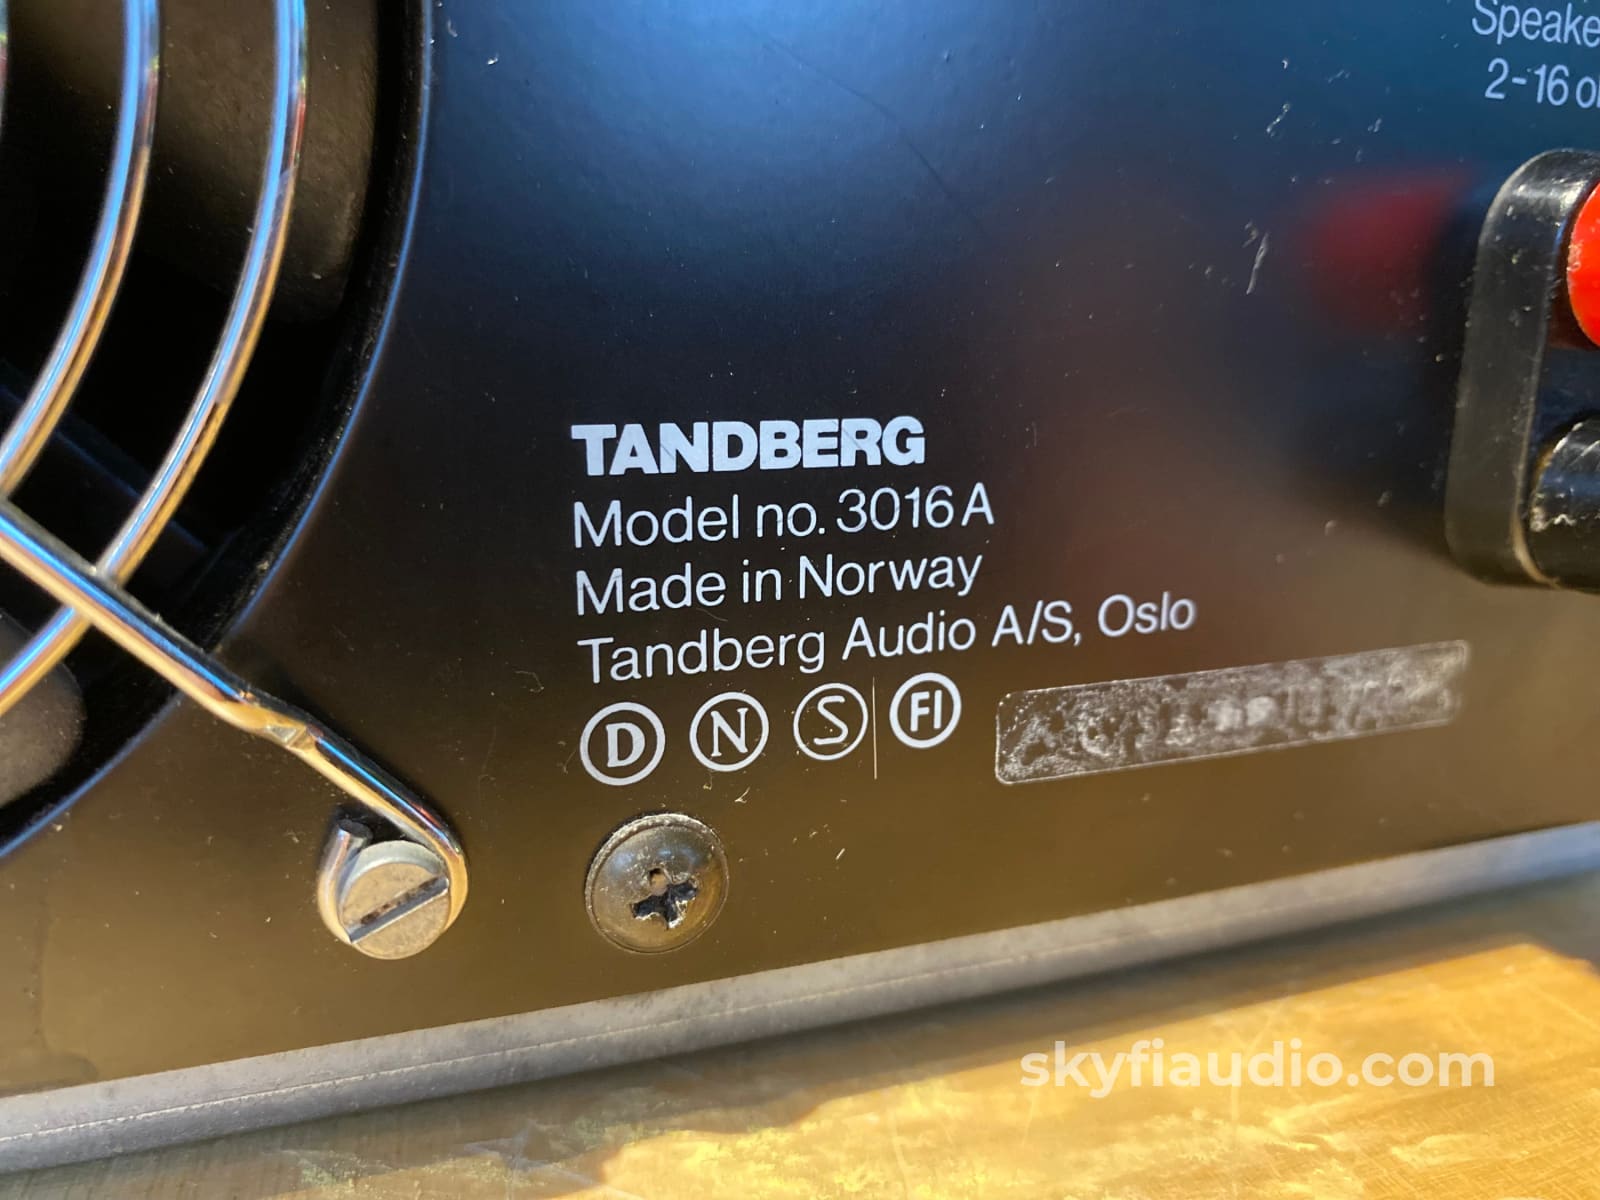 Tandberb 3016 Amplifier - Flagship Amp With 220W Uber Rare